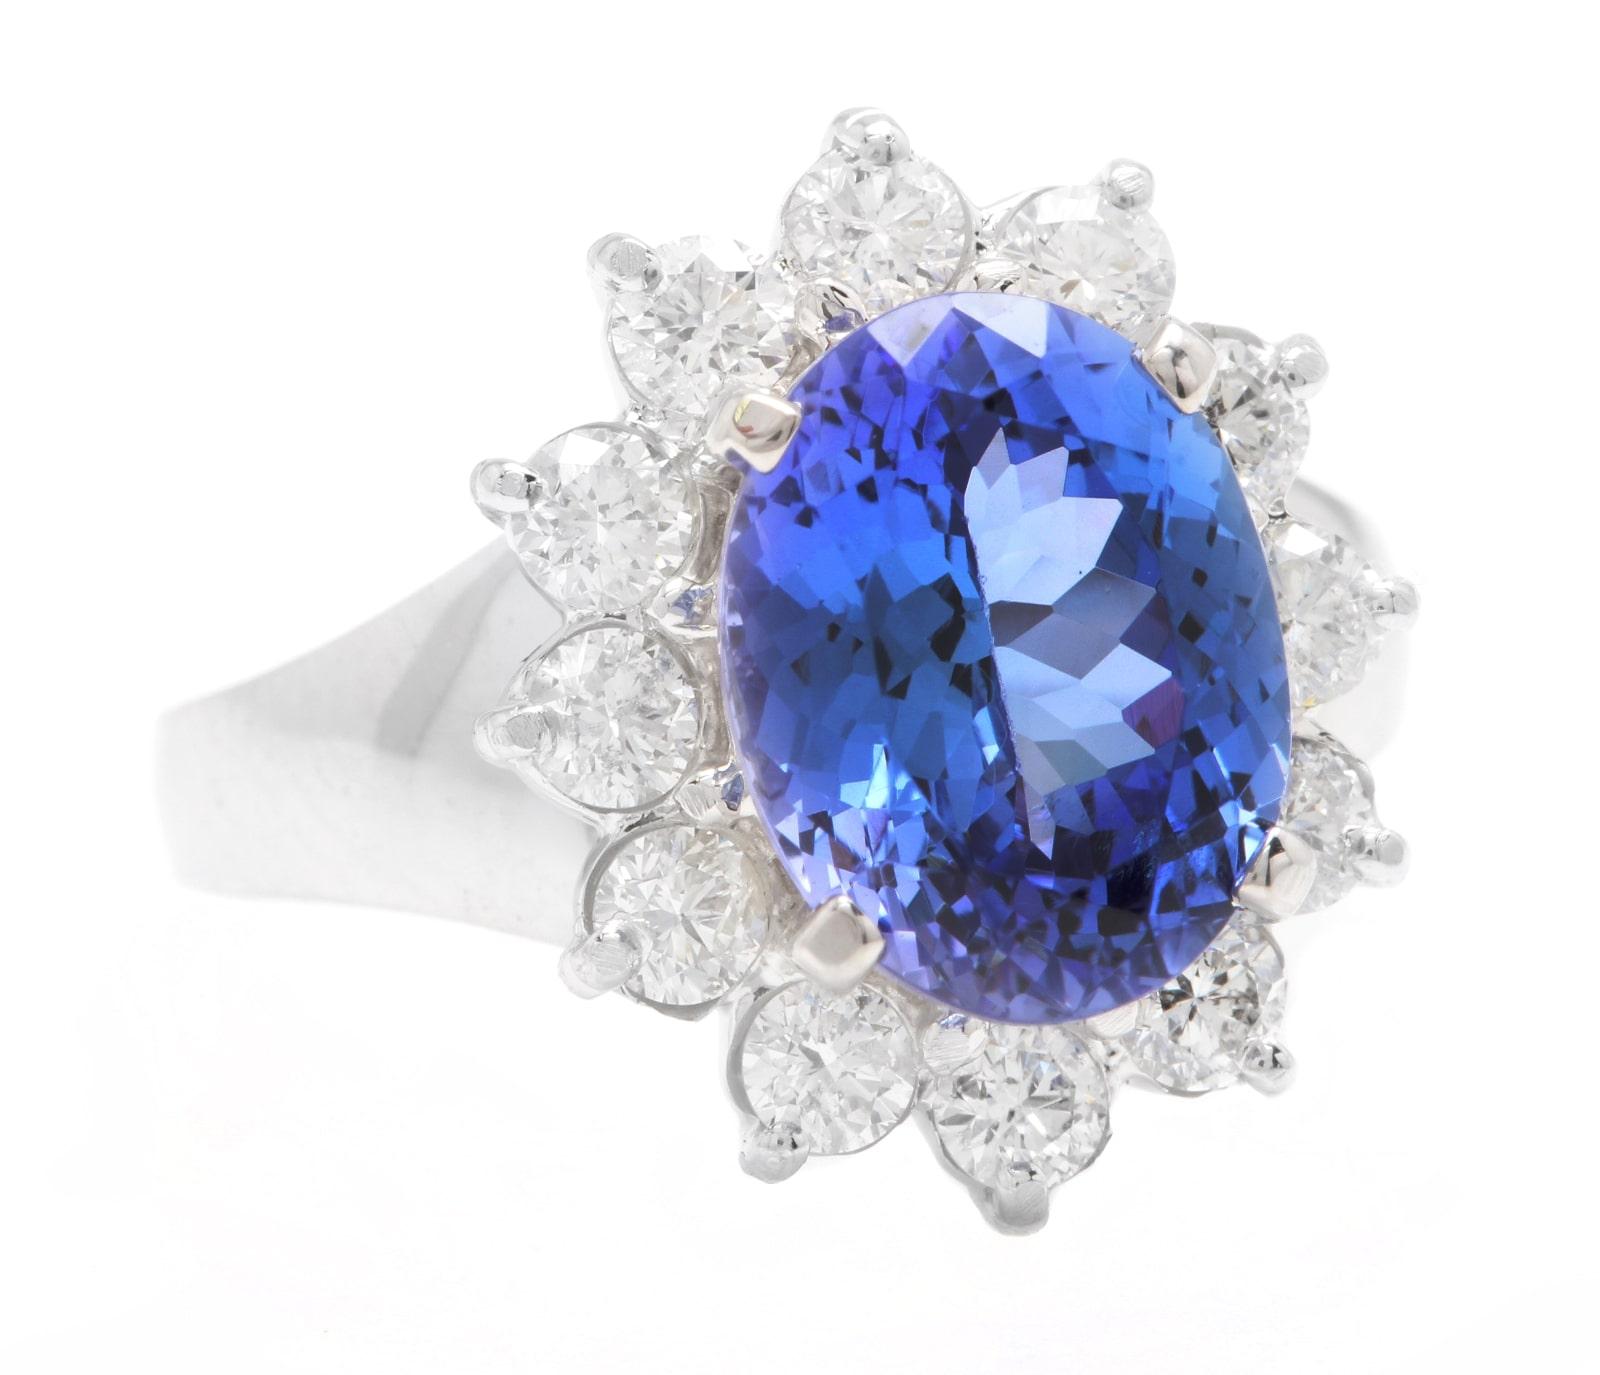 4.90 Carats Natural Very Nice Looking Tanzanite and Diamond 14K Solid White Gold Ring

Suggested Replacement Value: Approx.  $6,500.00

Total Natural Oval Cut Tanzanite Weight is: Approx. 4.00 Carats 

Tanzanite Measures: Approx. 11.00 x